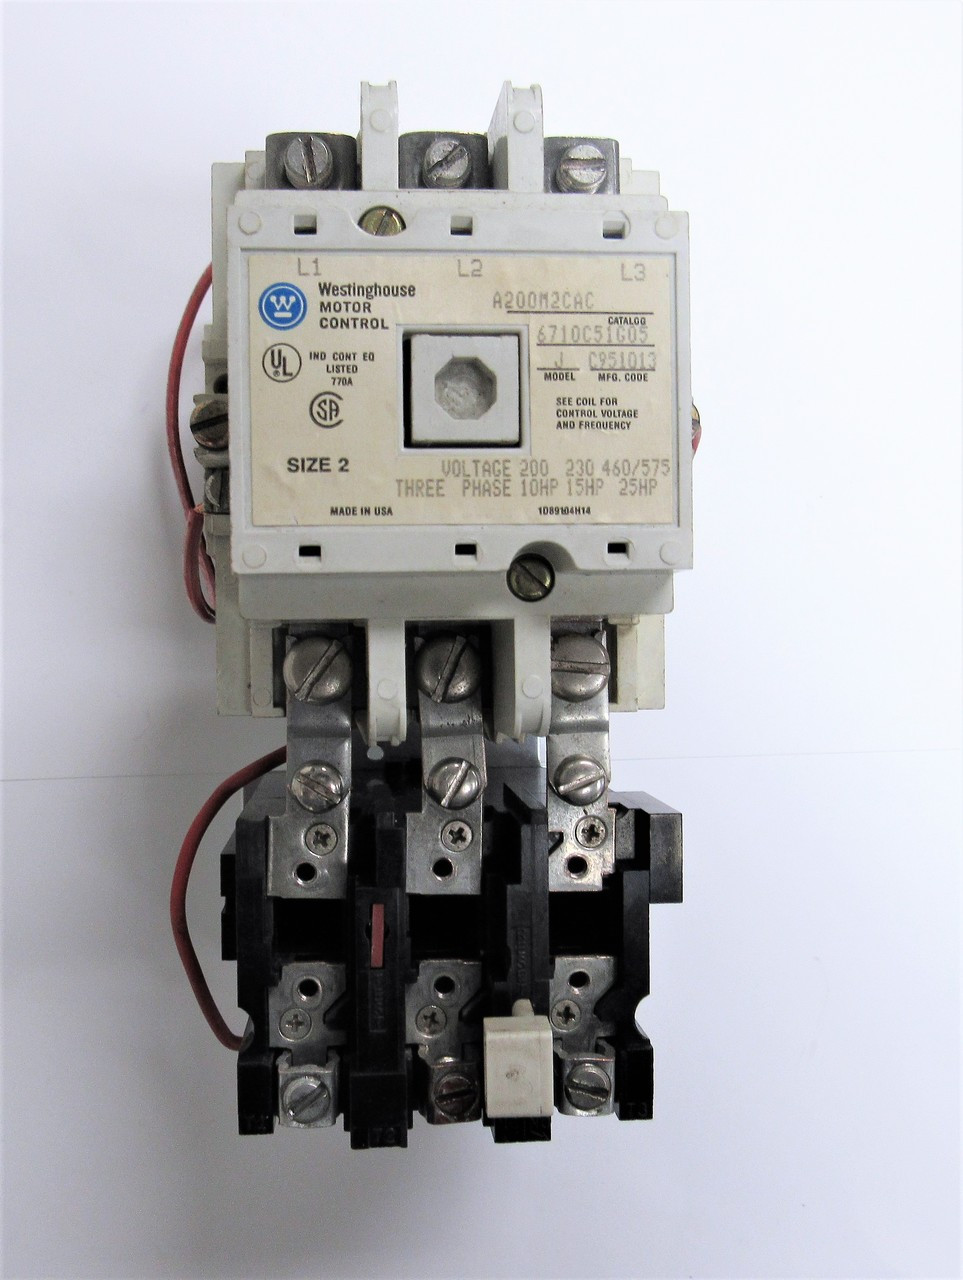 Westinghouse Motor Control A200M2CAC, 3P, Size 2 Model J with 120V coil -  National Circuit Breaker Store